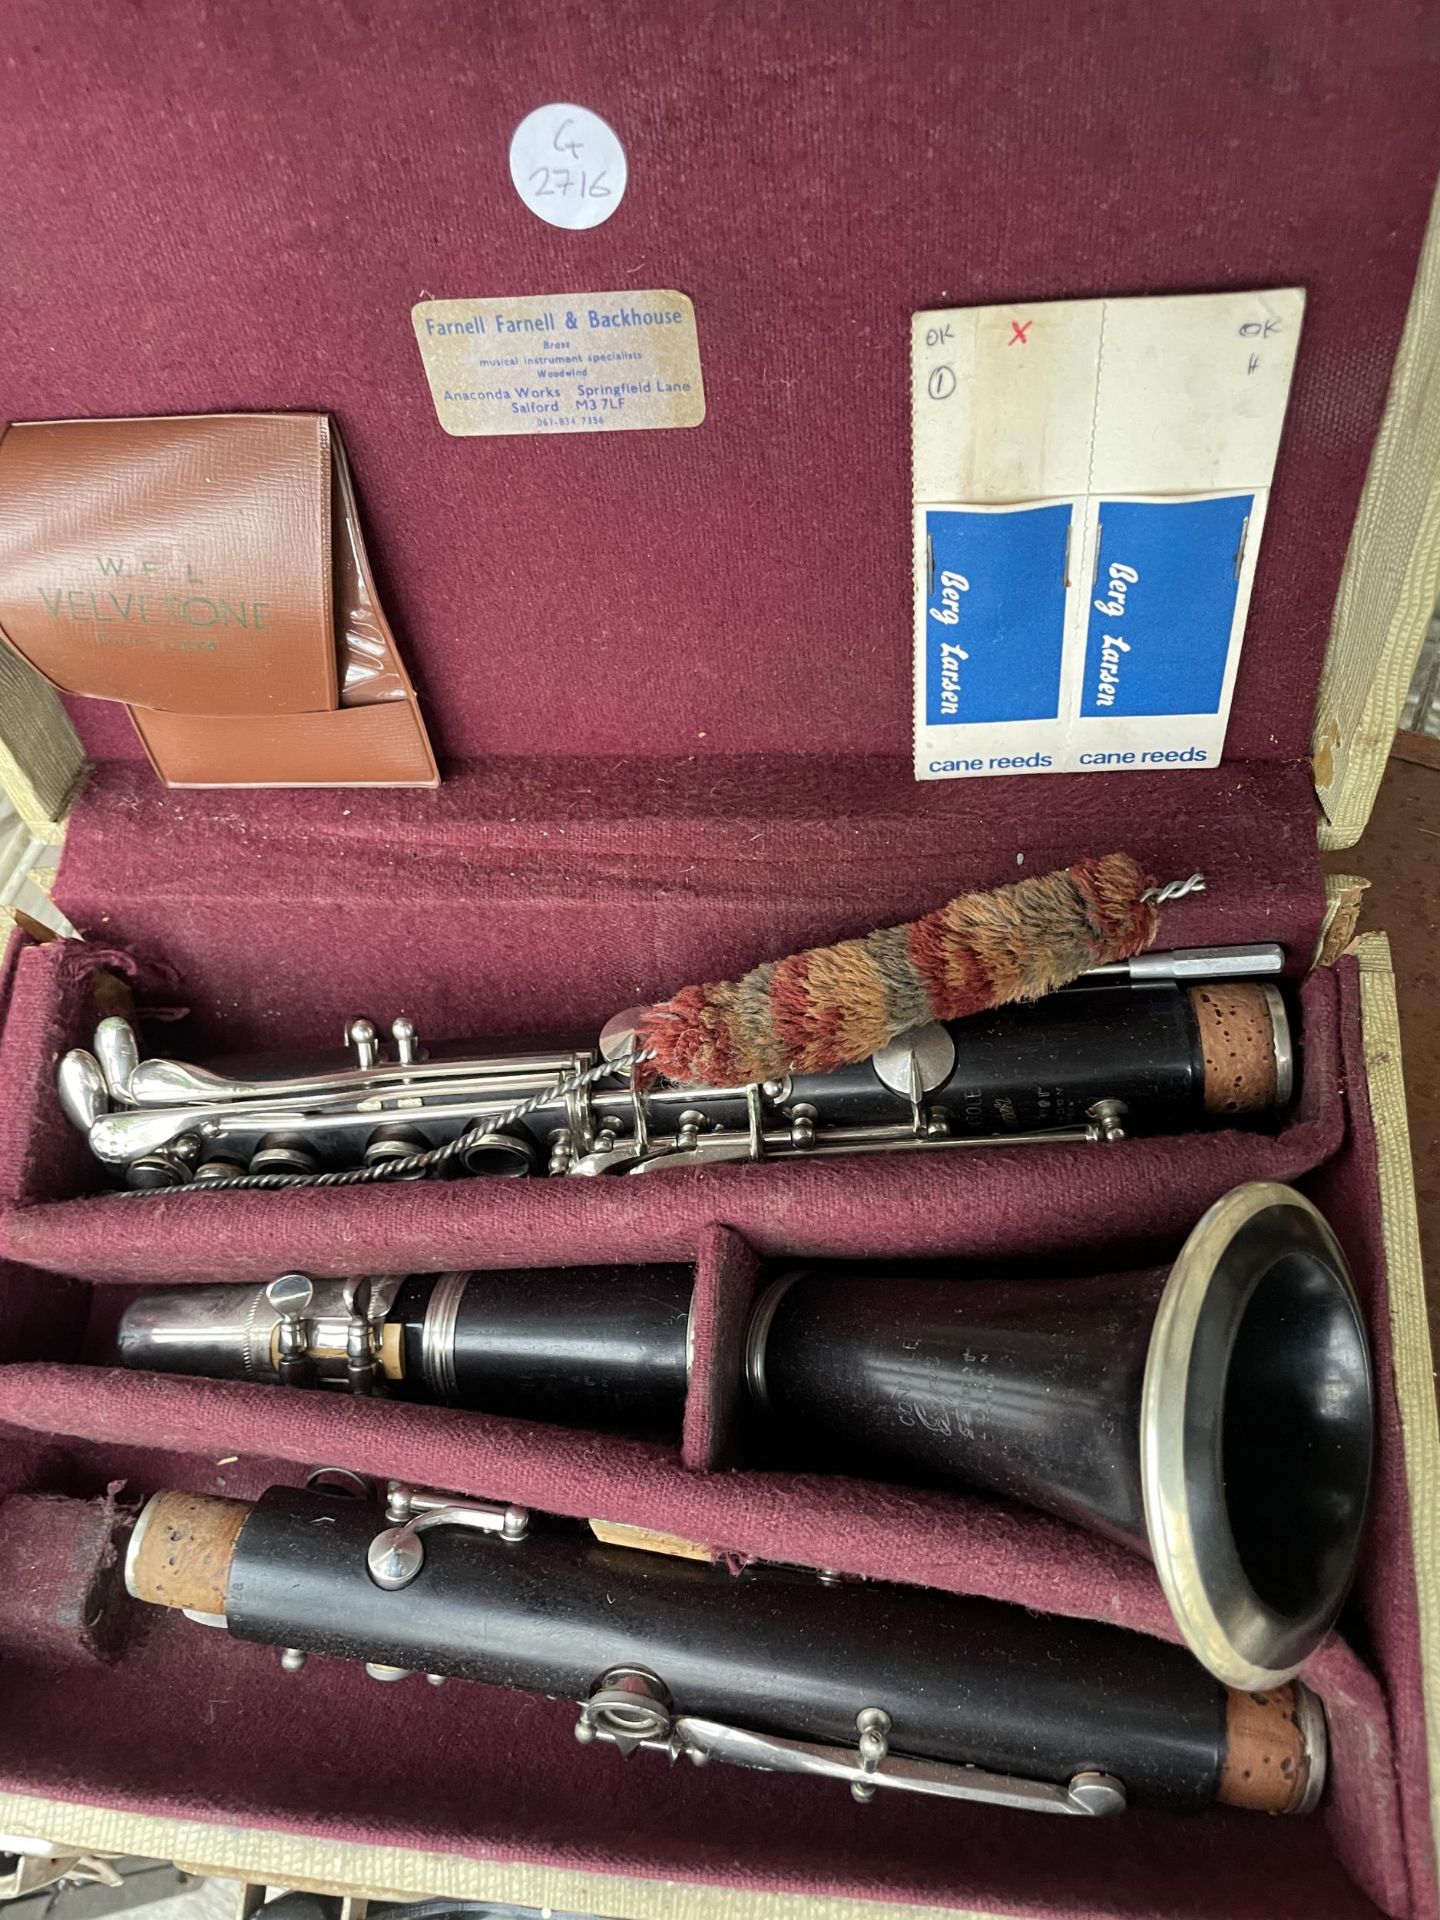 A CASED CONSOLE SUPER CLARINET - Image 2 of 5